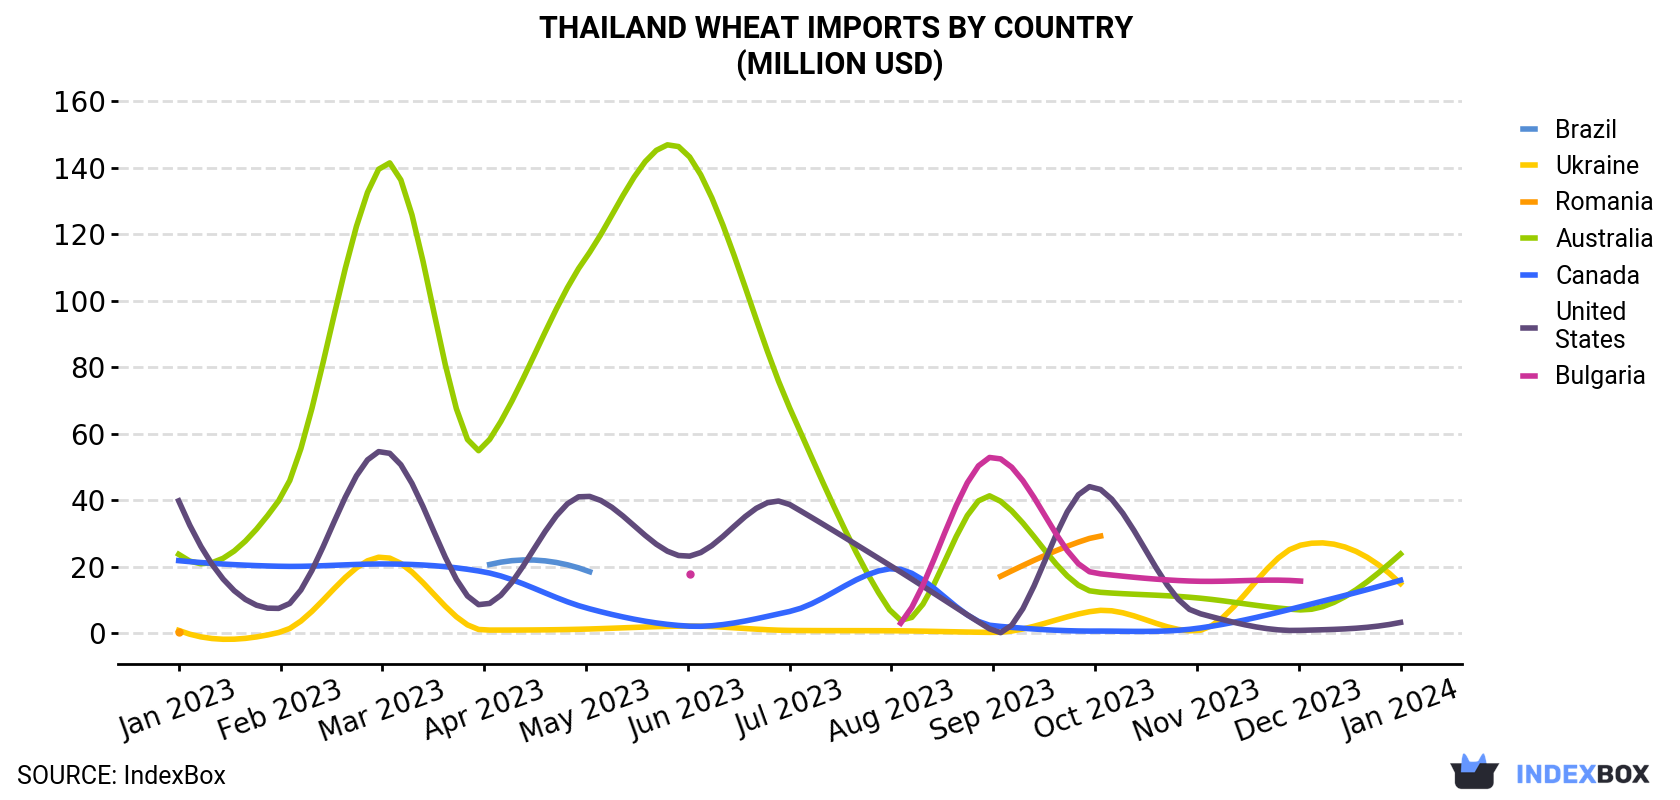 Thailand Wheat Imports By Country (Million USD)